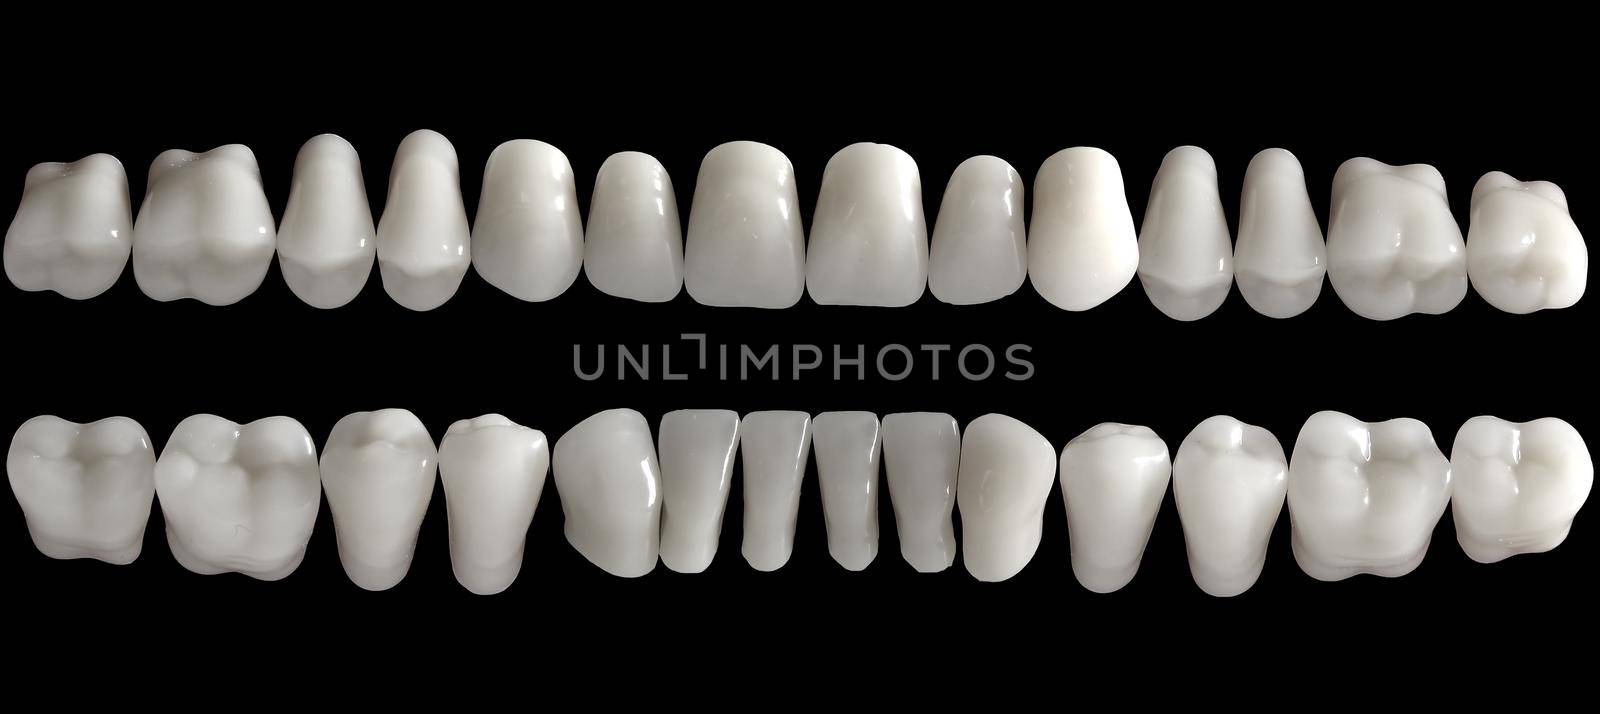 Tooth samples on black background by adamr